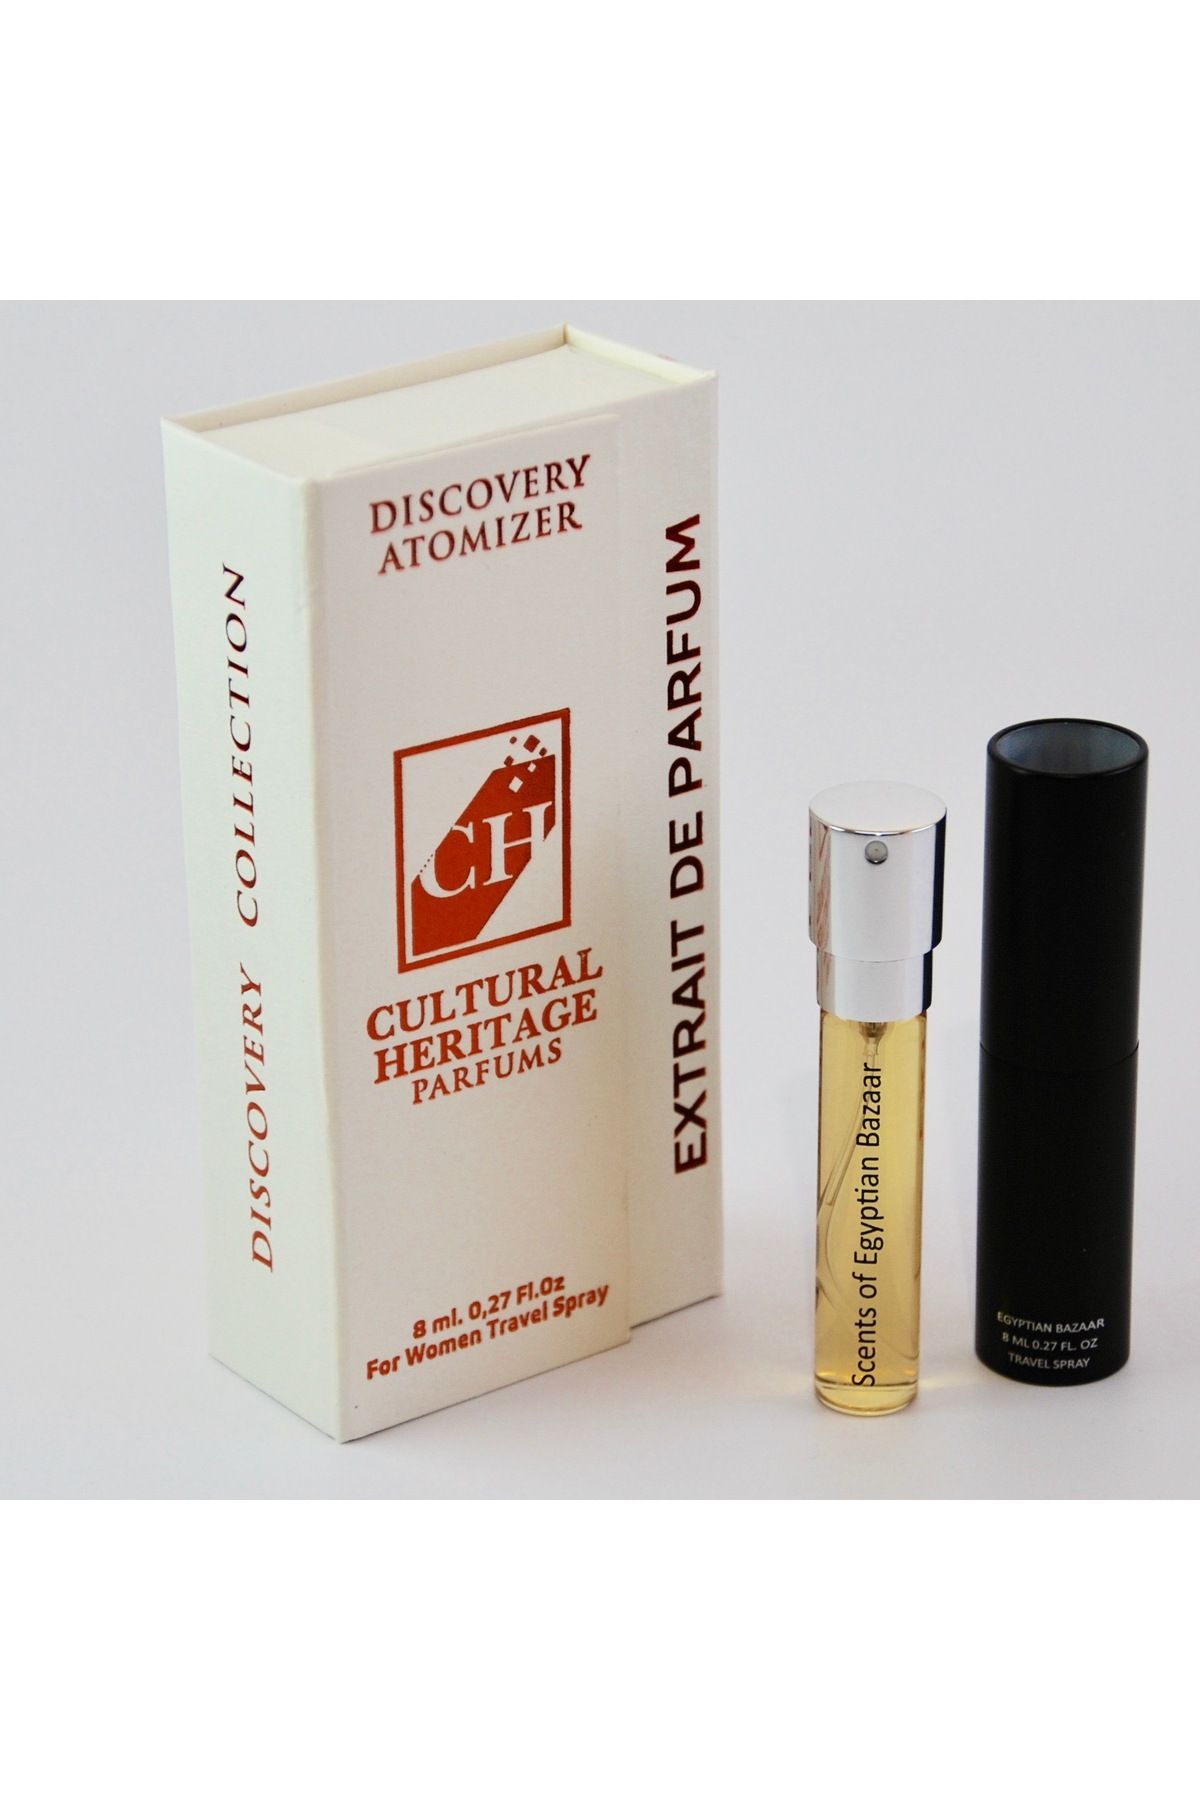 CH CULTURAL HERITAGE ,Scents of Egyptian Bazaar Discovery Atomizer Travel Spray, For Women,